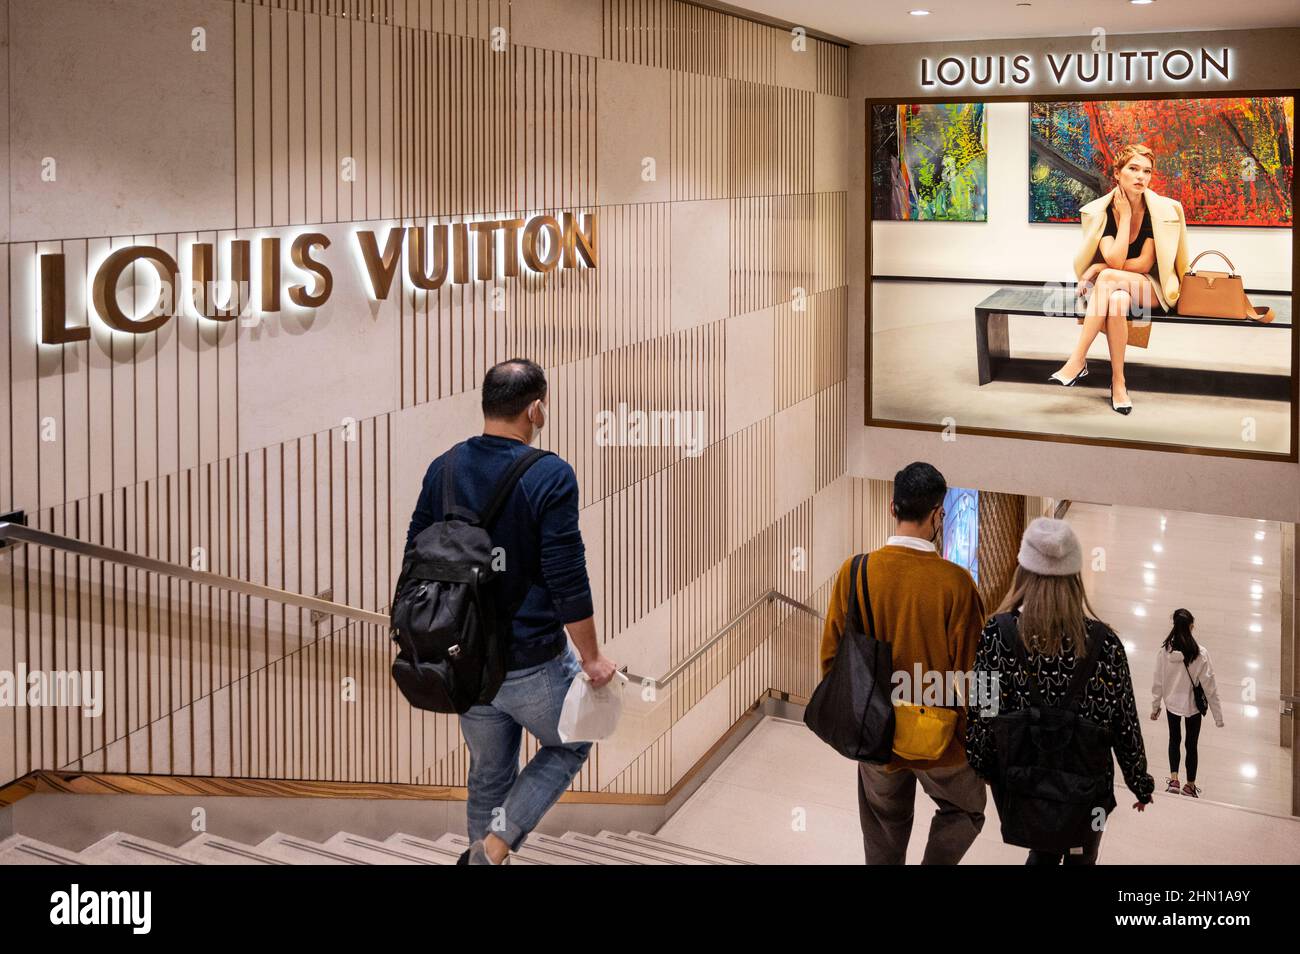 SHANGHAI, CHINA - MAY 29, 2021 - A Louis Vuitton store in Shanghai, China,  April 29, 2021. May 19, 2022 -- court hearing on LouisVuitton's (LV) luxury  Stock Photo - Alamy